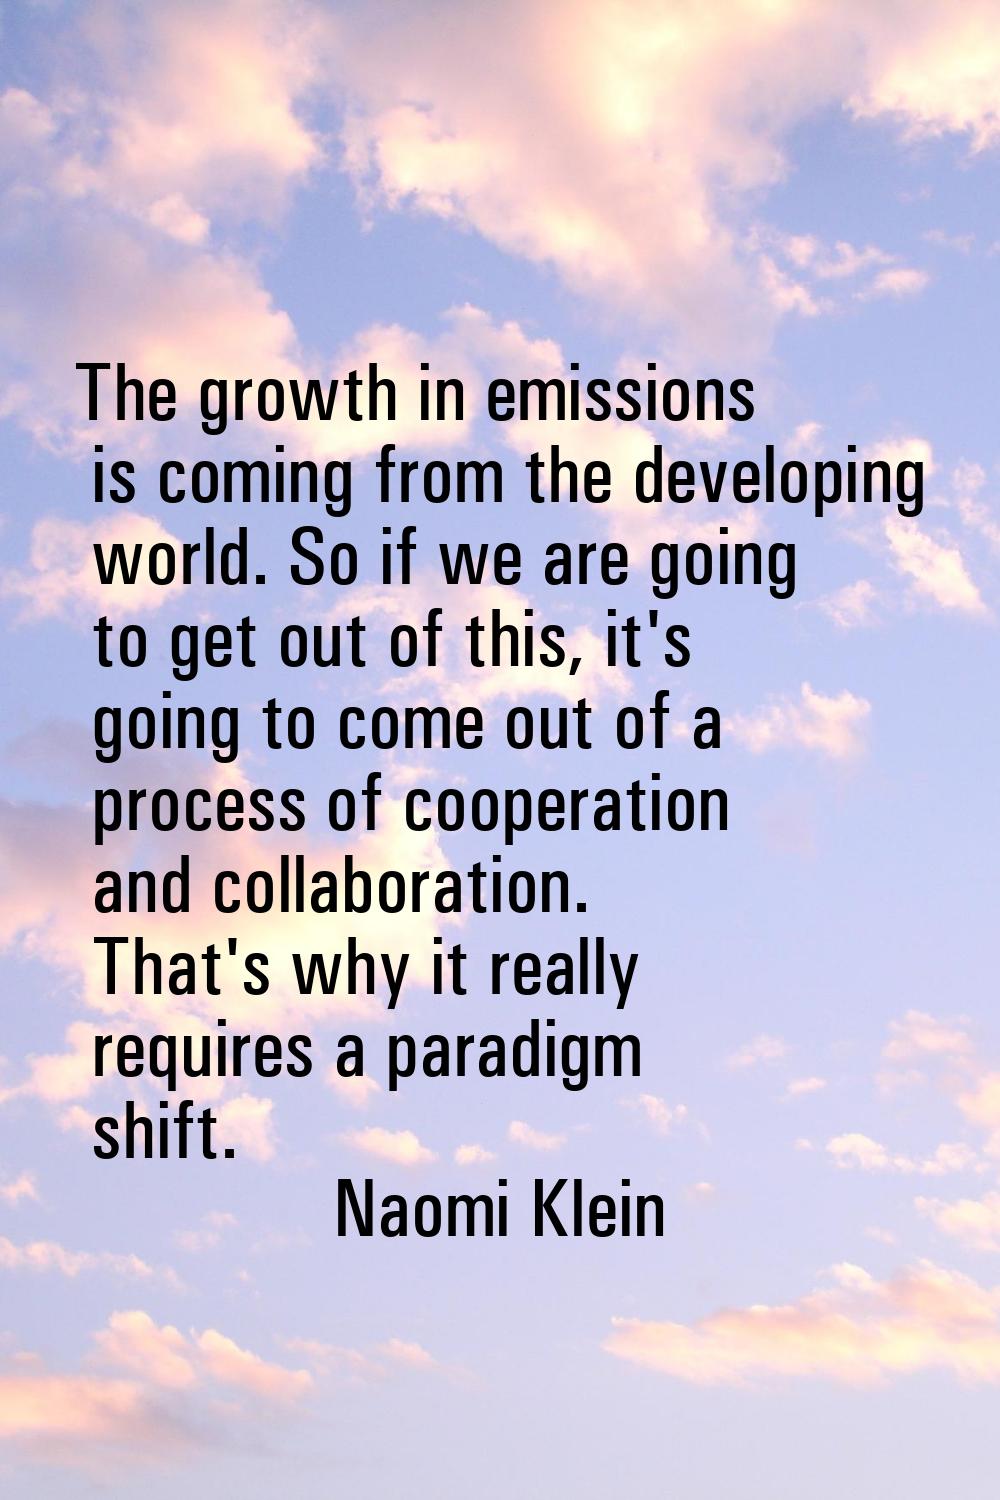 The growth in emissions is coming from the developing world. So if we are going to get out of this,